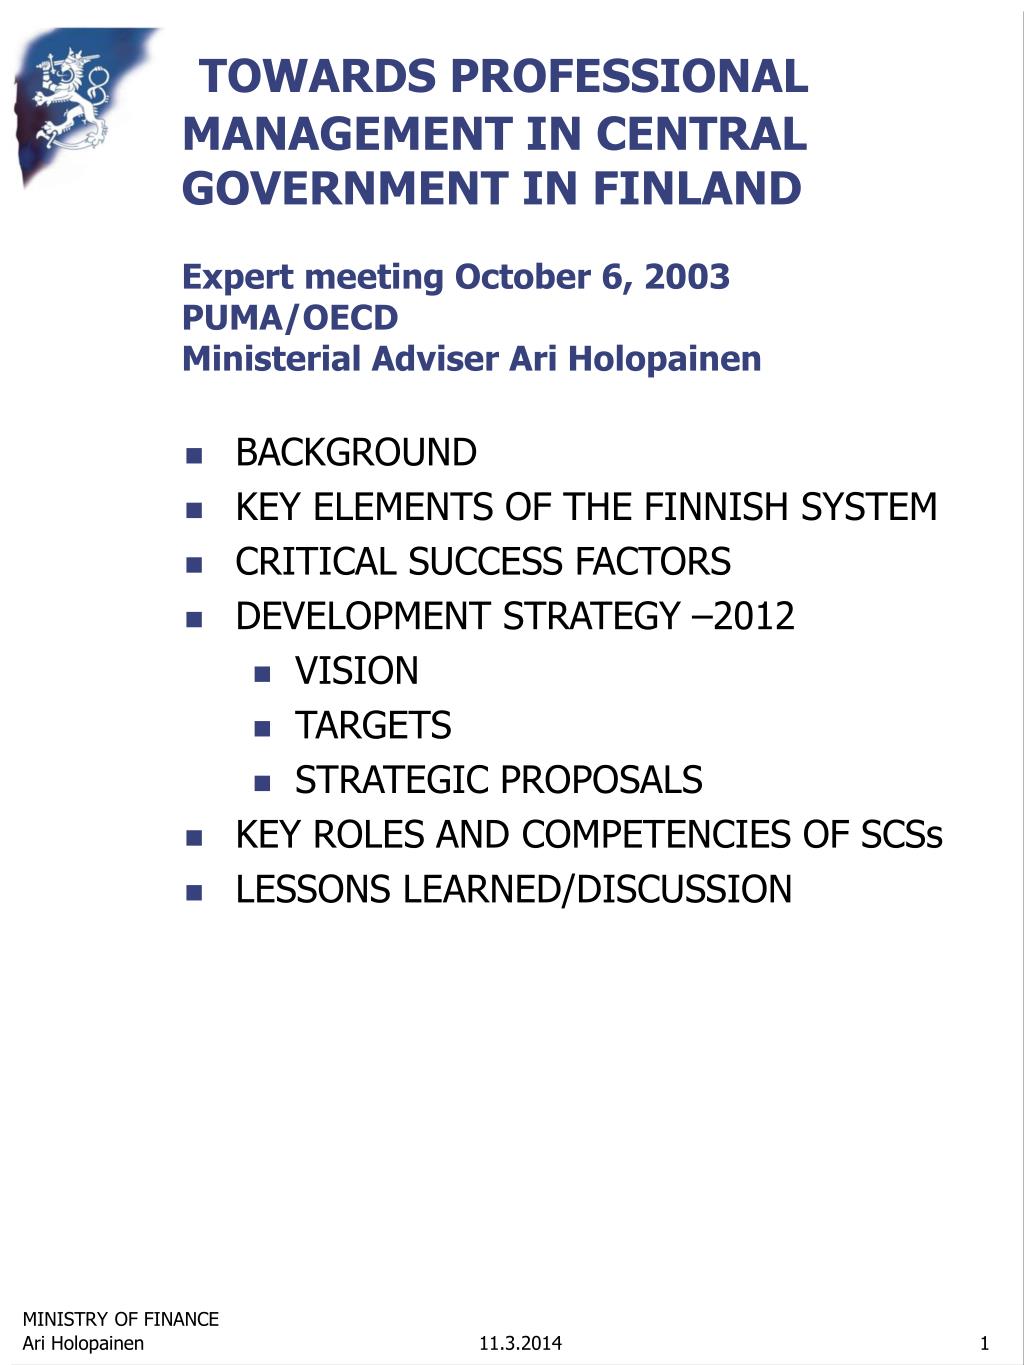 PPT - TOWARDS PROFESSIONAL MANAGEMENT IN CENTRAL GOVERNMENT IN FINLAND  Expert meeting October 6, 2003 PUMA/OECD Ministerial Ad PowerPoint  Presentation - ID:243108